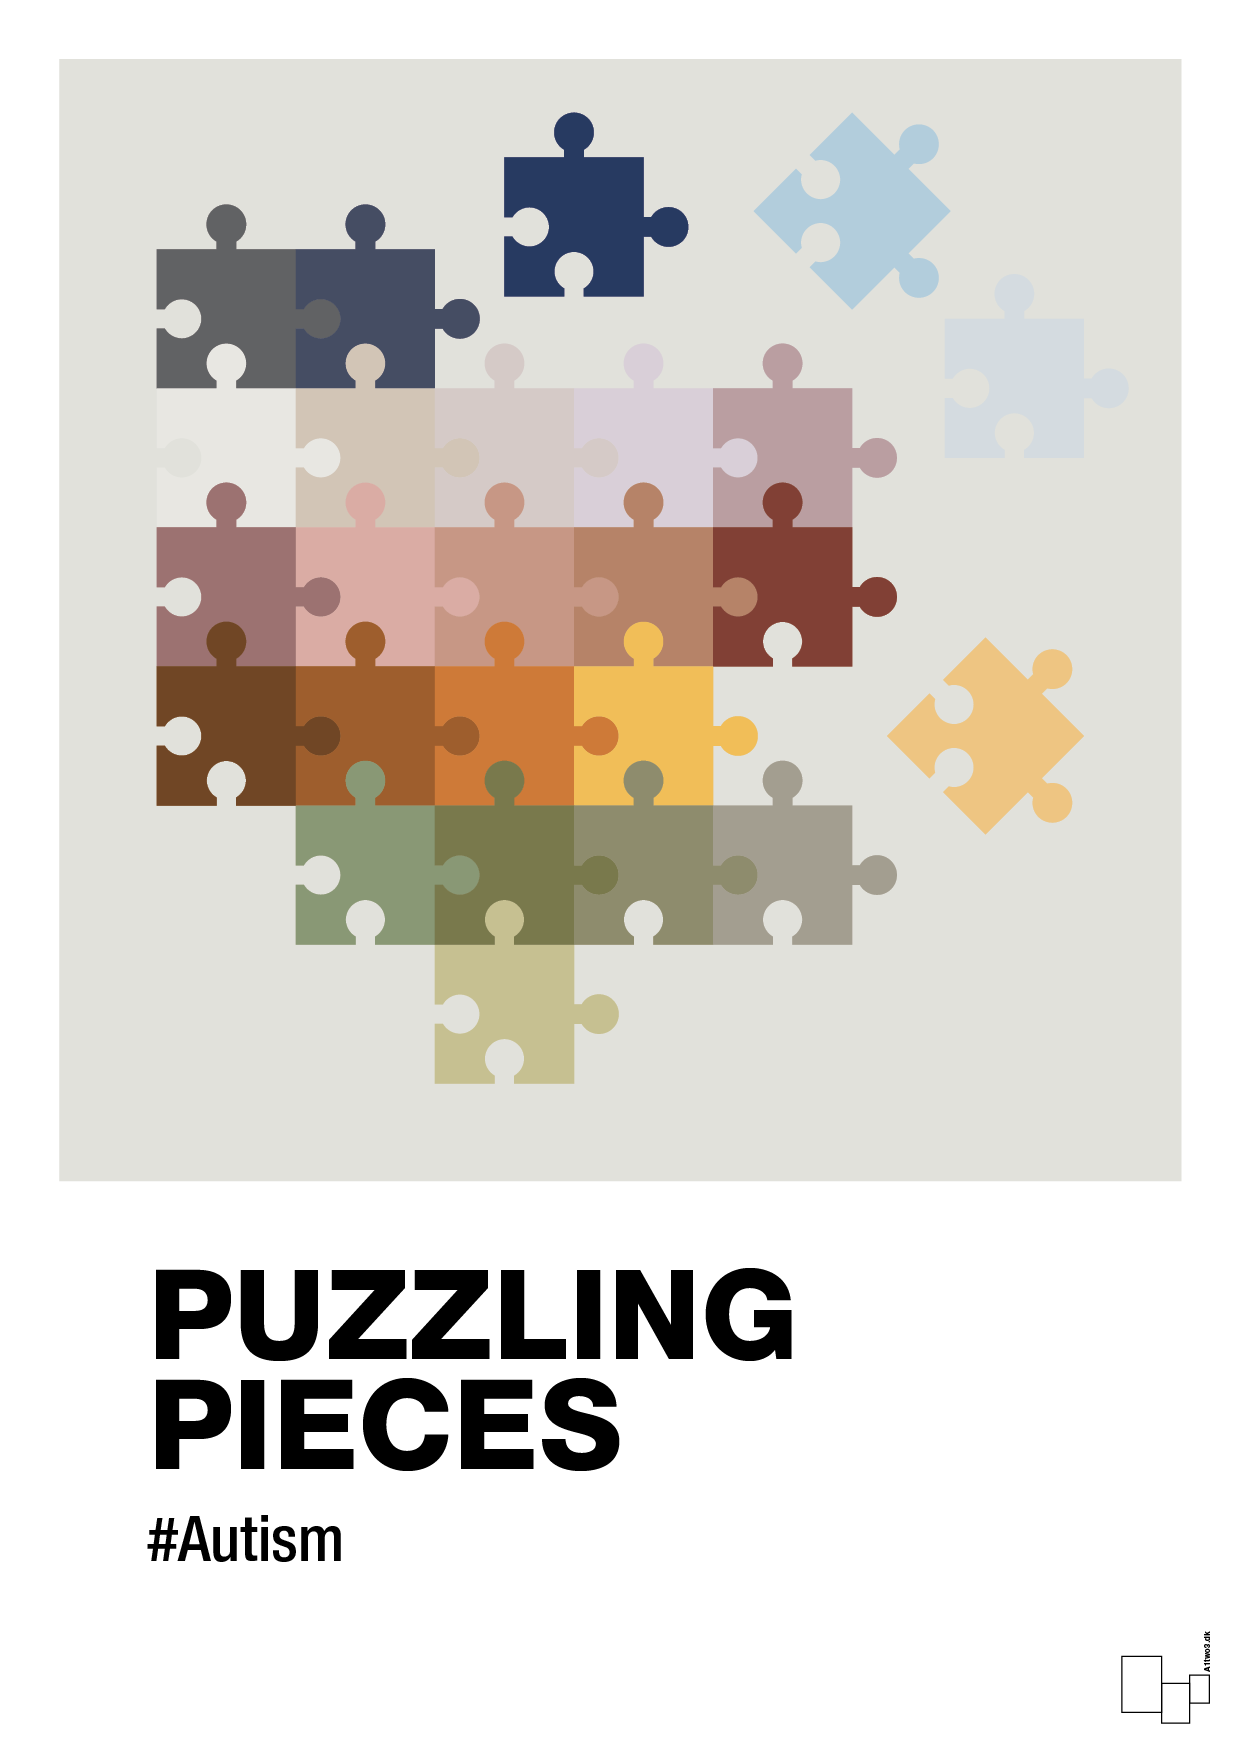 puzzling pieces - Plakat med Samfund i Painters White